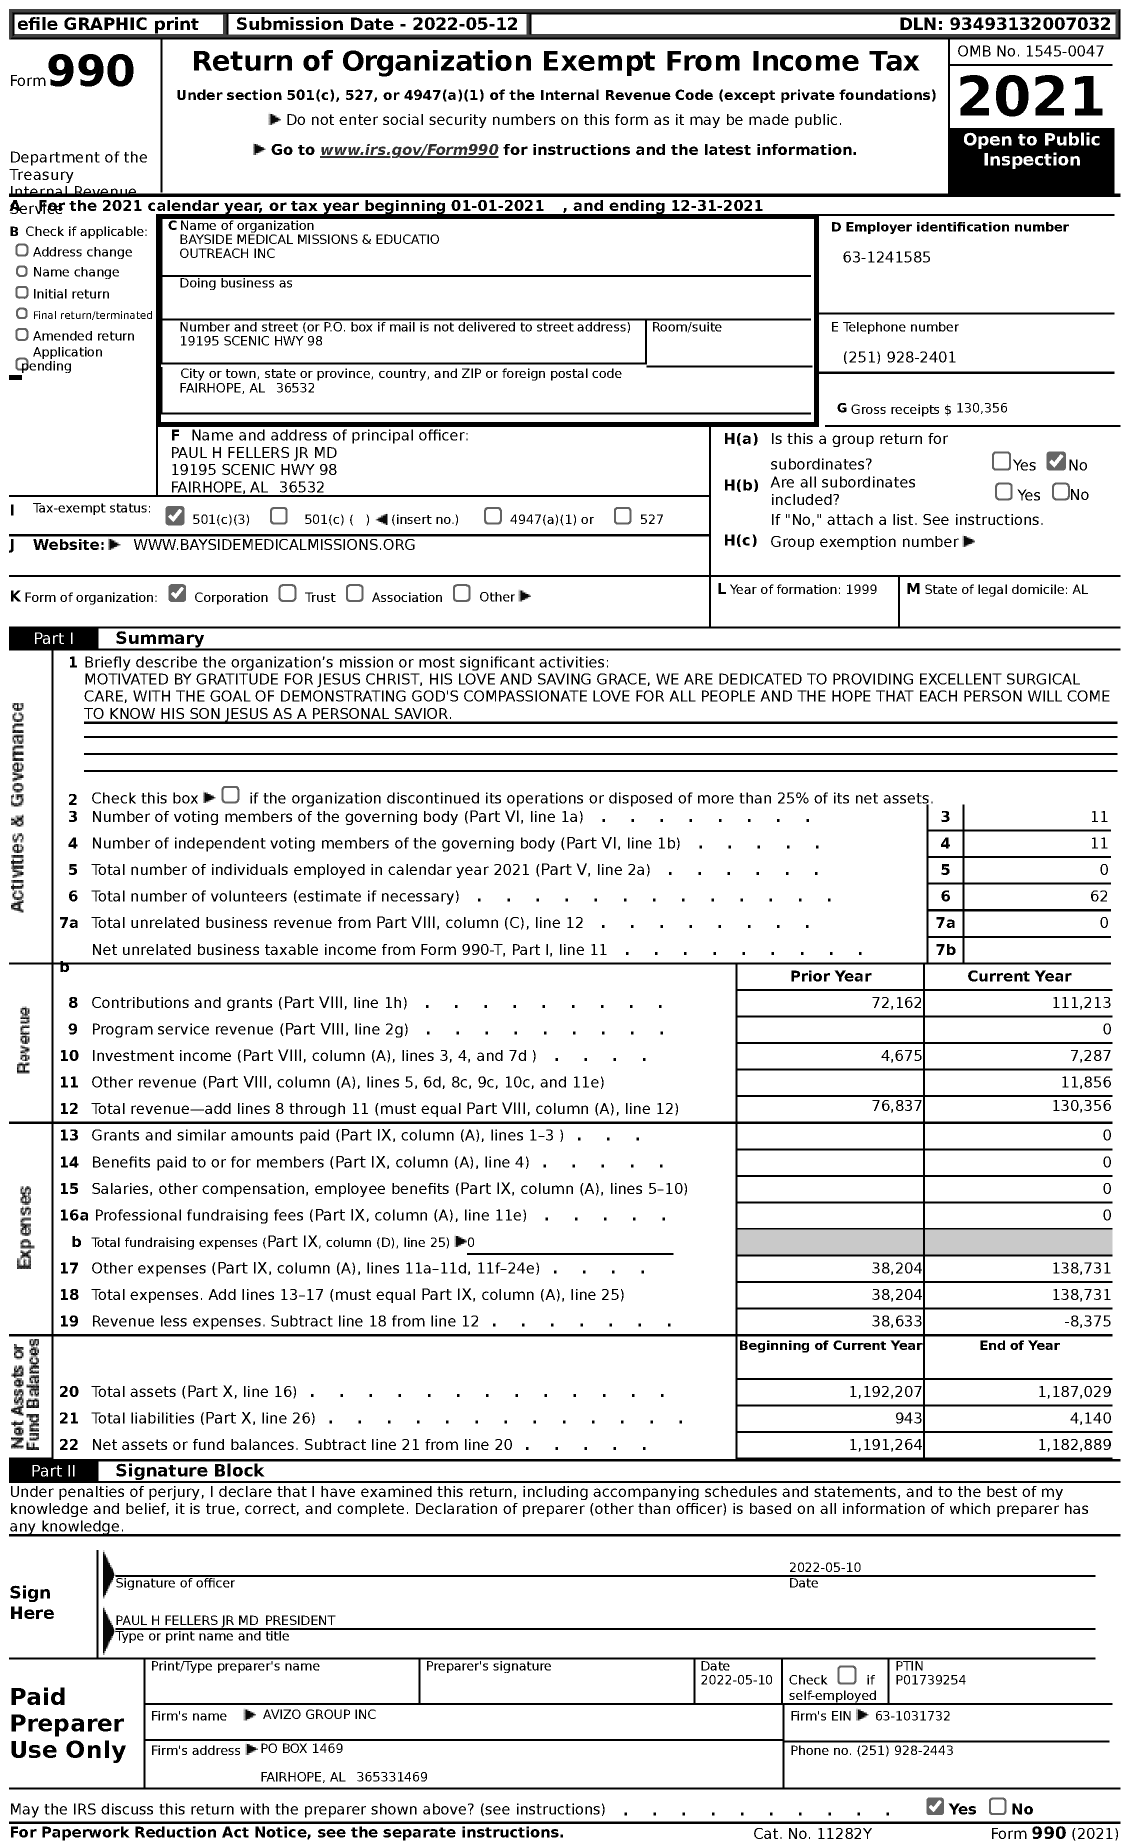 Image of first page of 2021 Form 990 for Bayside Medical Missions and Educatio Outreach